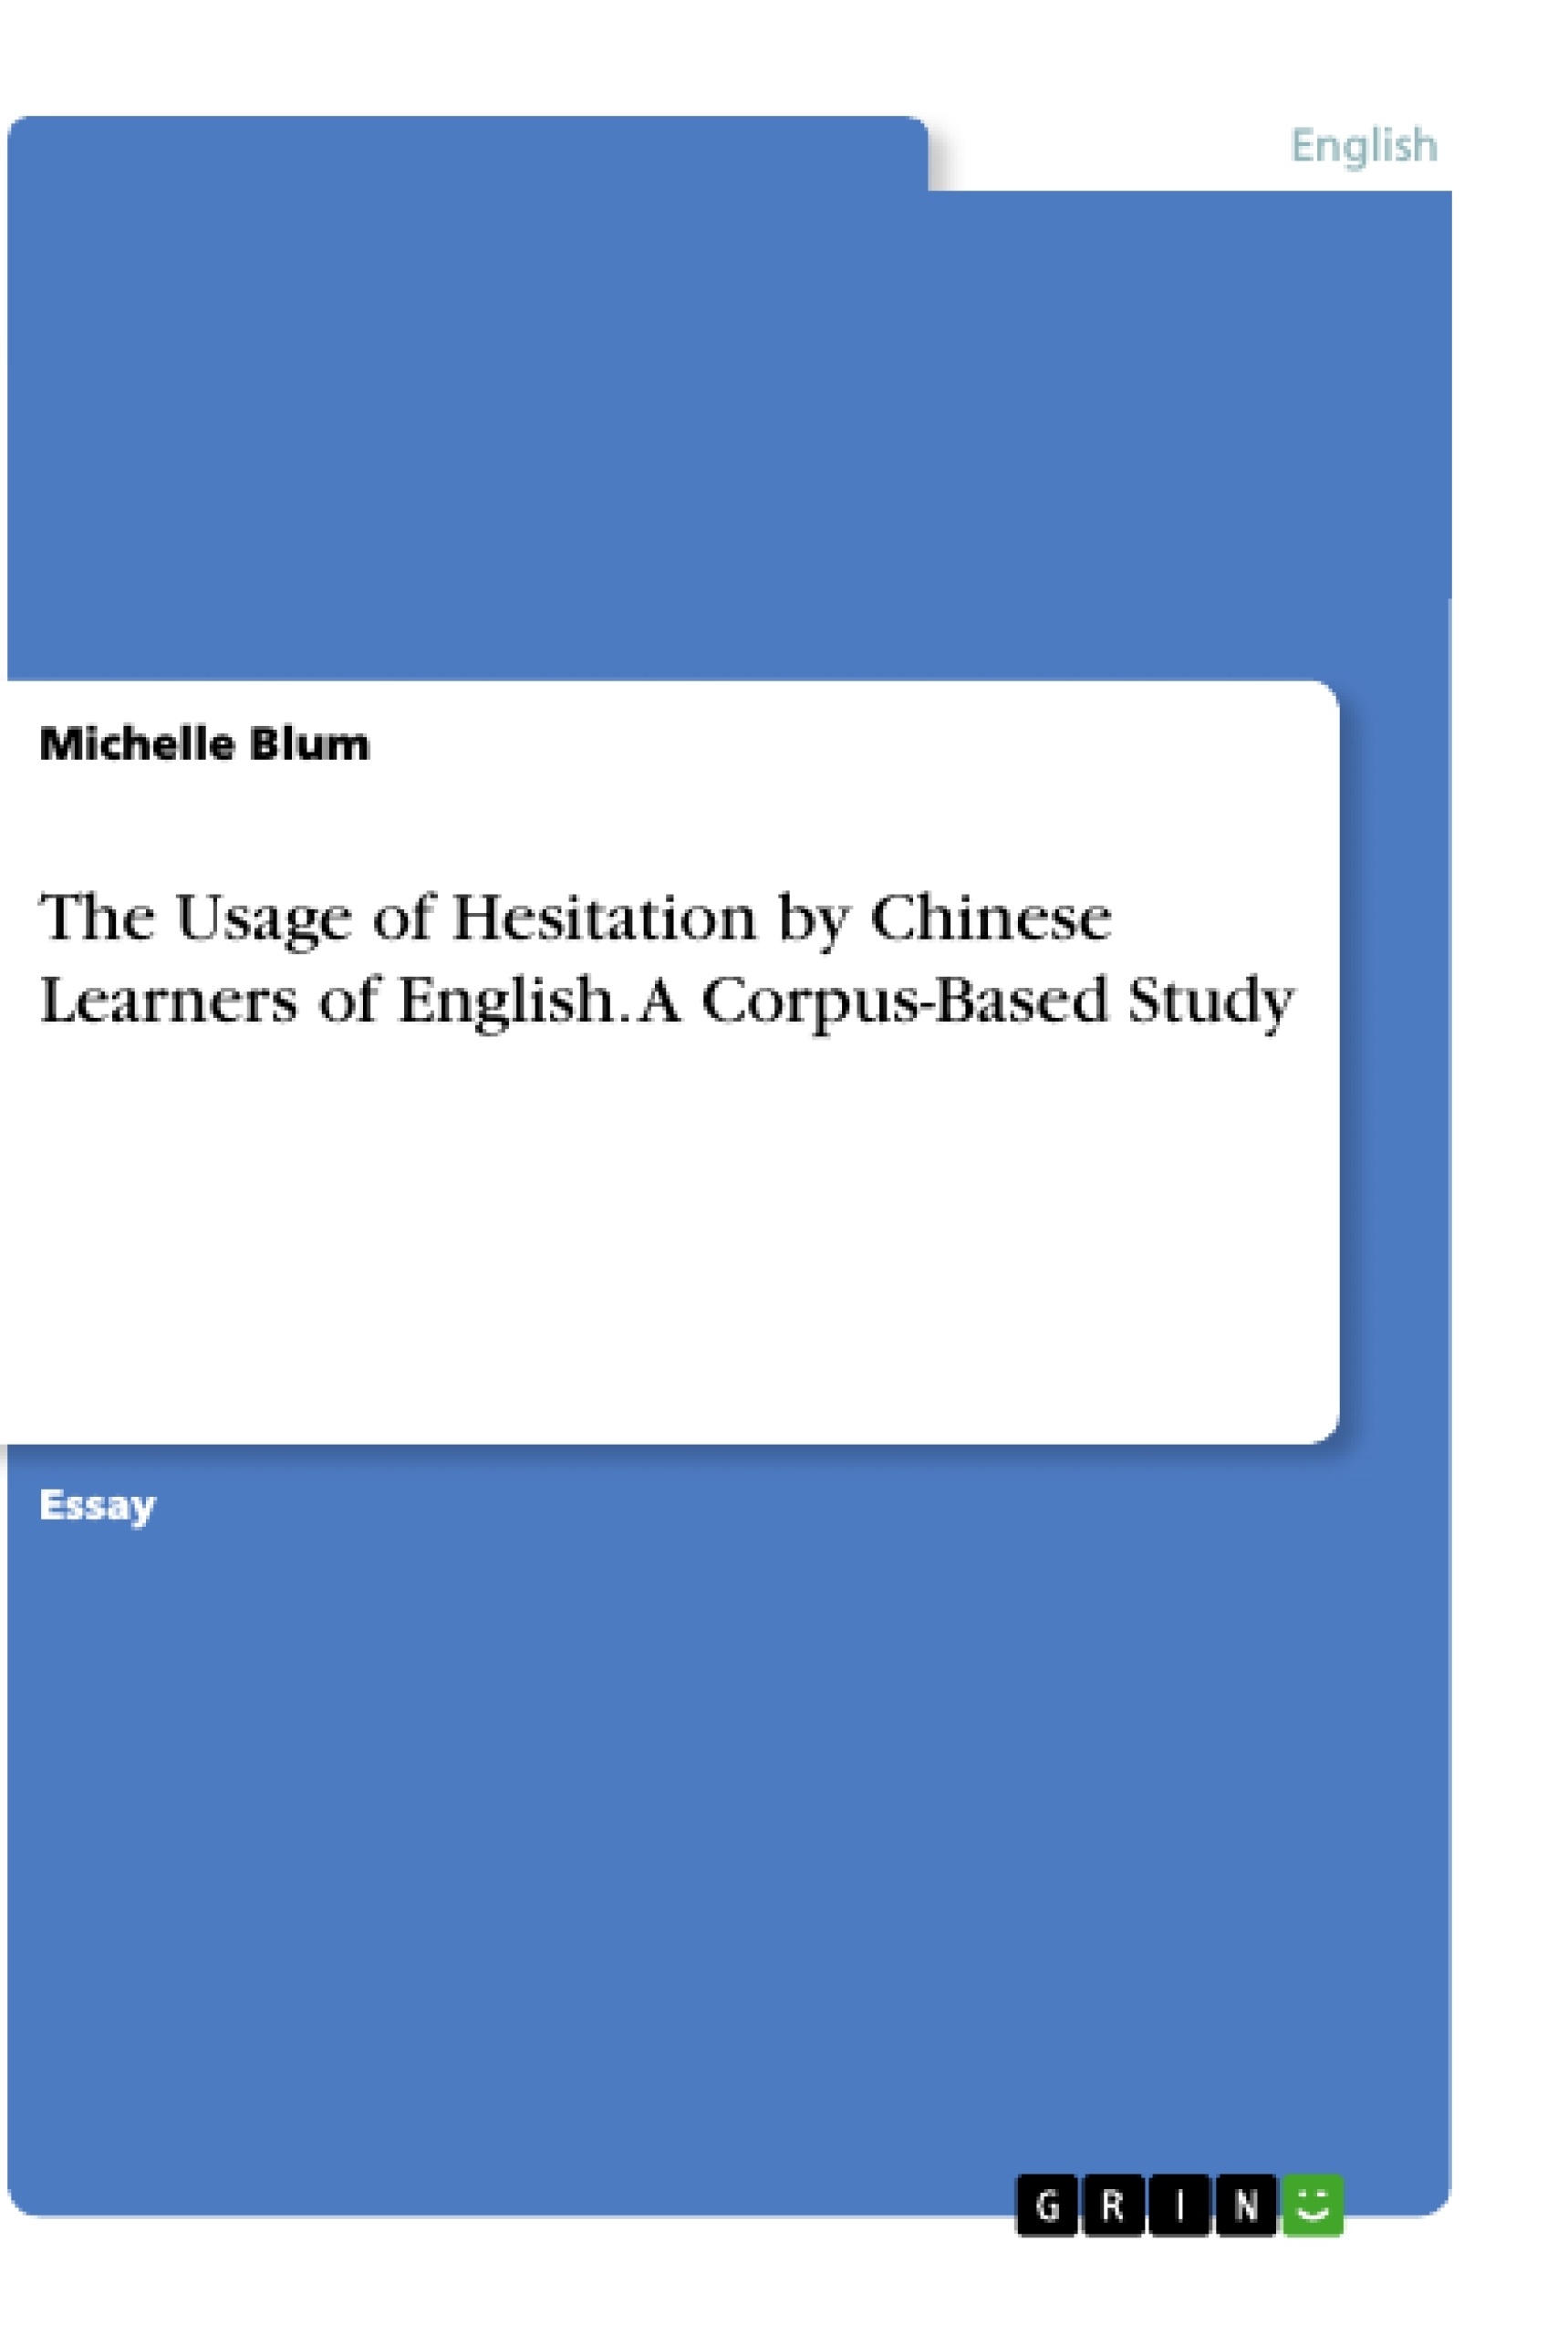 Título: The Usage of Hesitation by Chinese Learners of English. A Corpus-Based Study